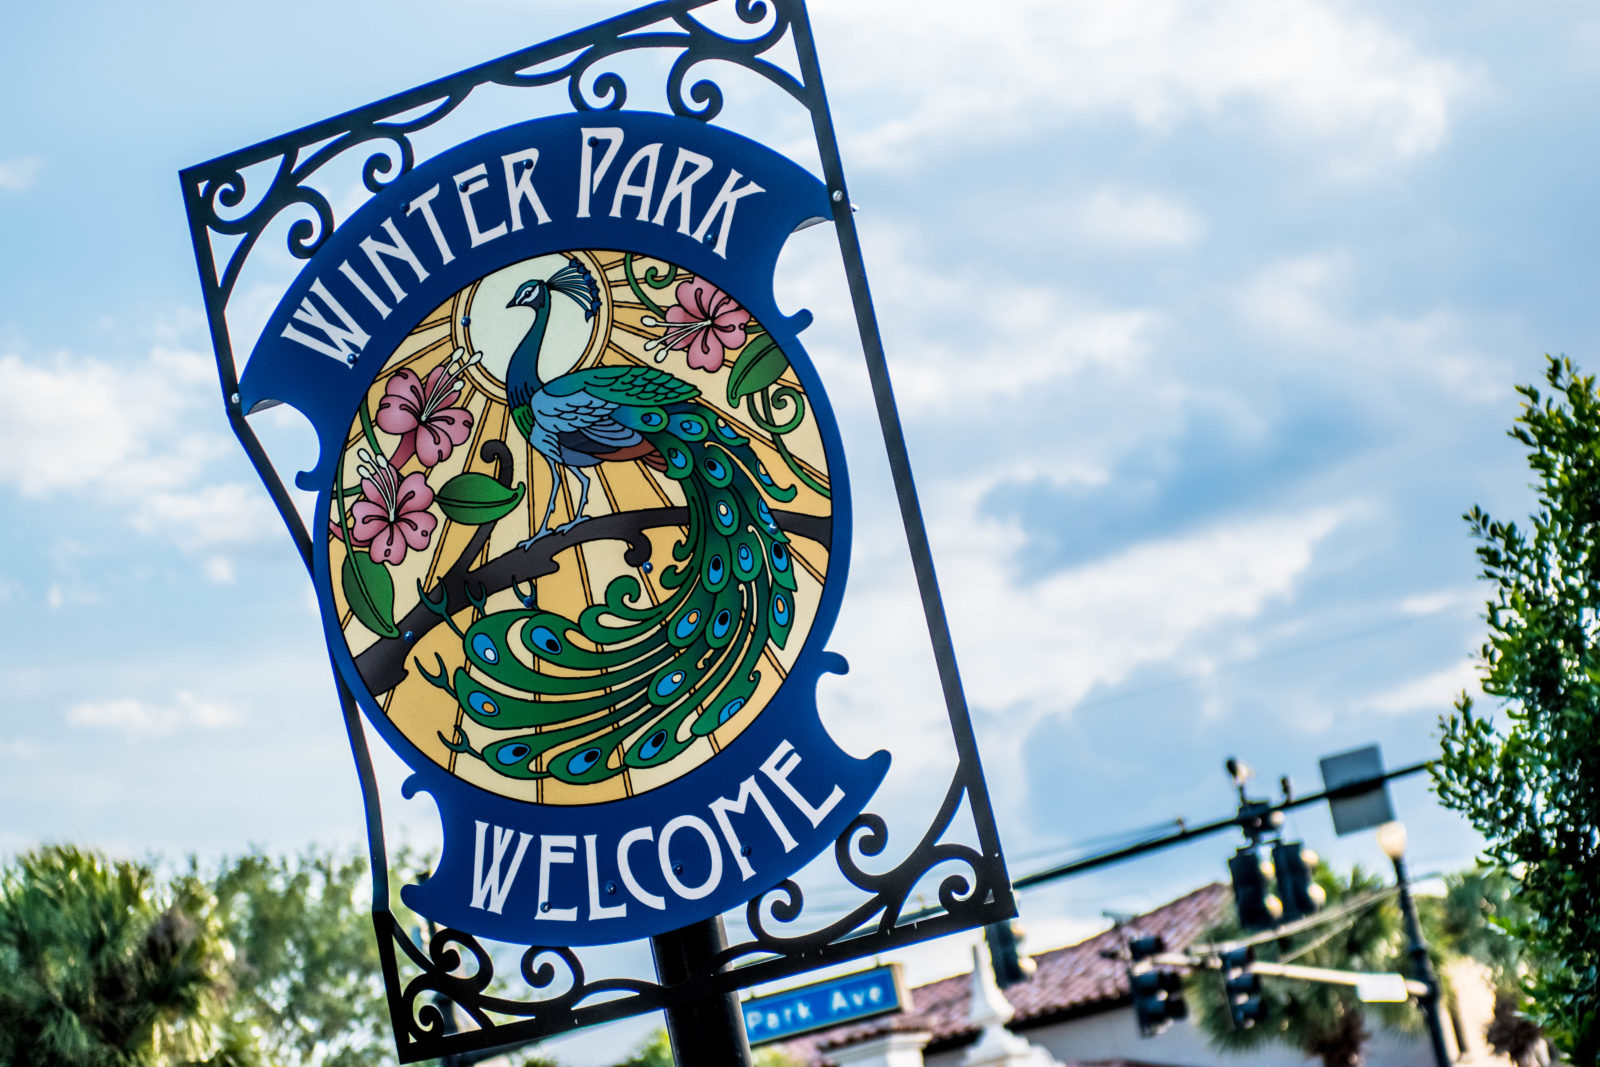 Winter Park Welcome sign.